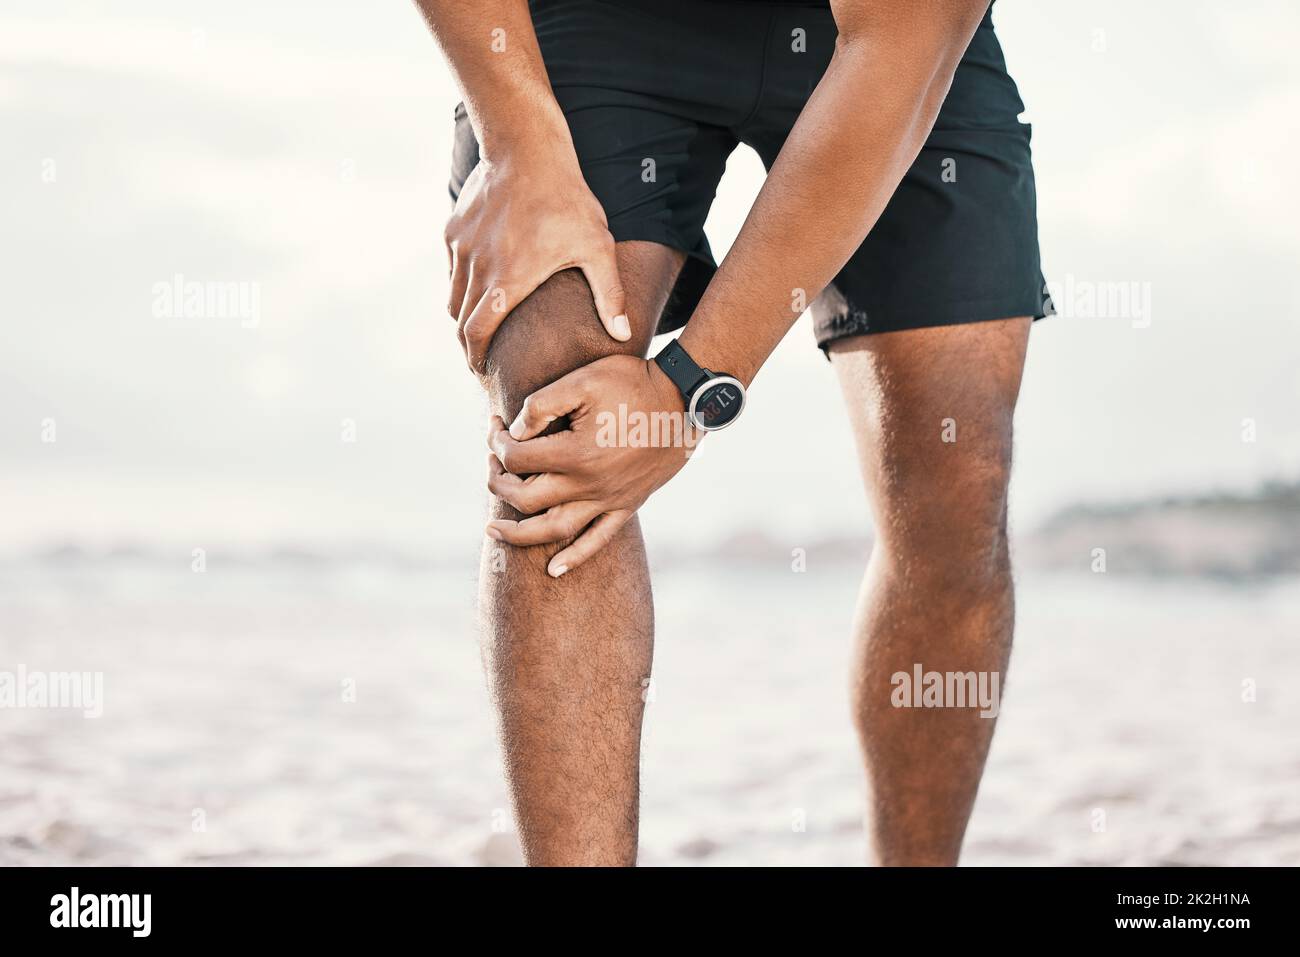 Looks like no more running. Cropped shot of an unrecognizable male athlete holding his knee in pain while exercising on the beach. Stock Photo